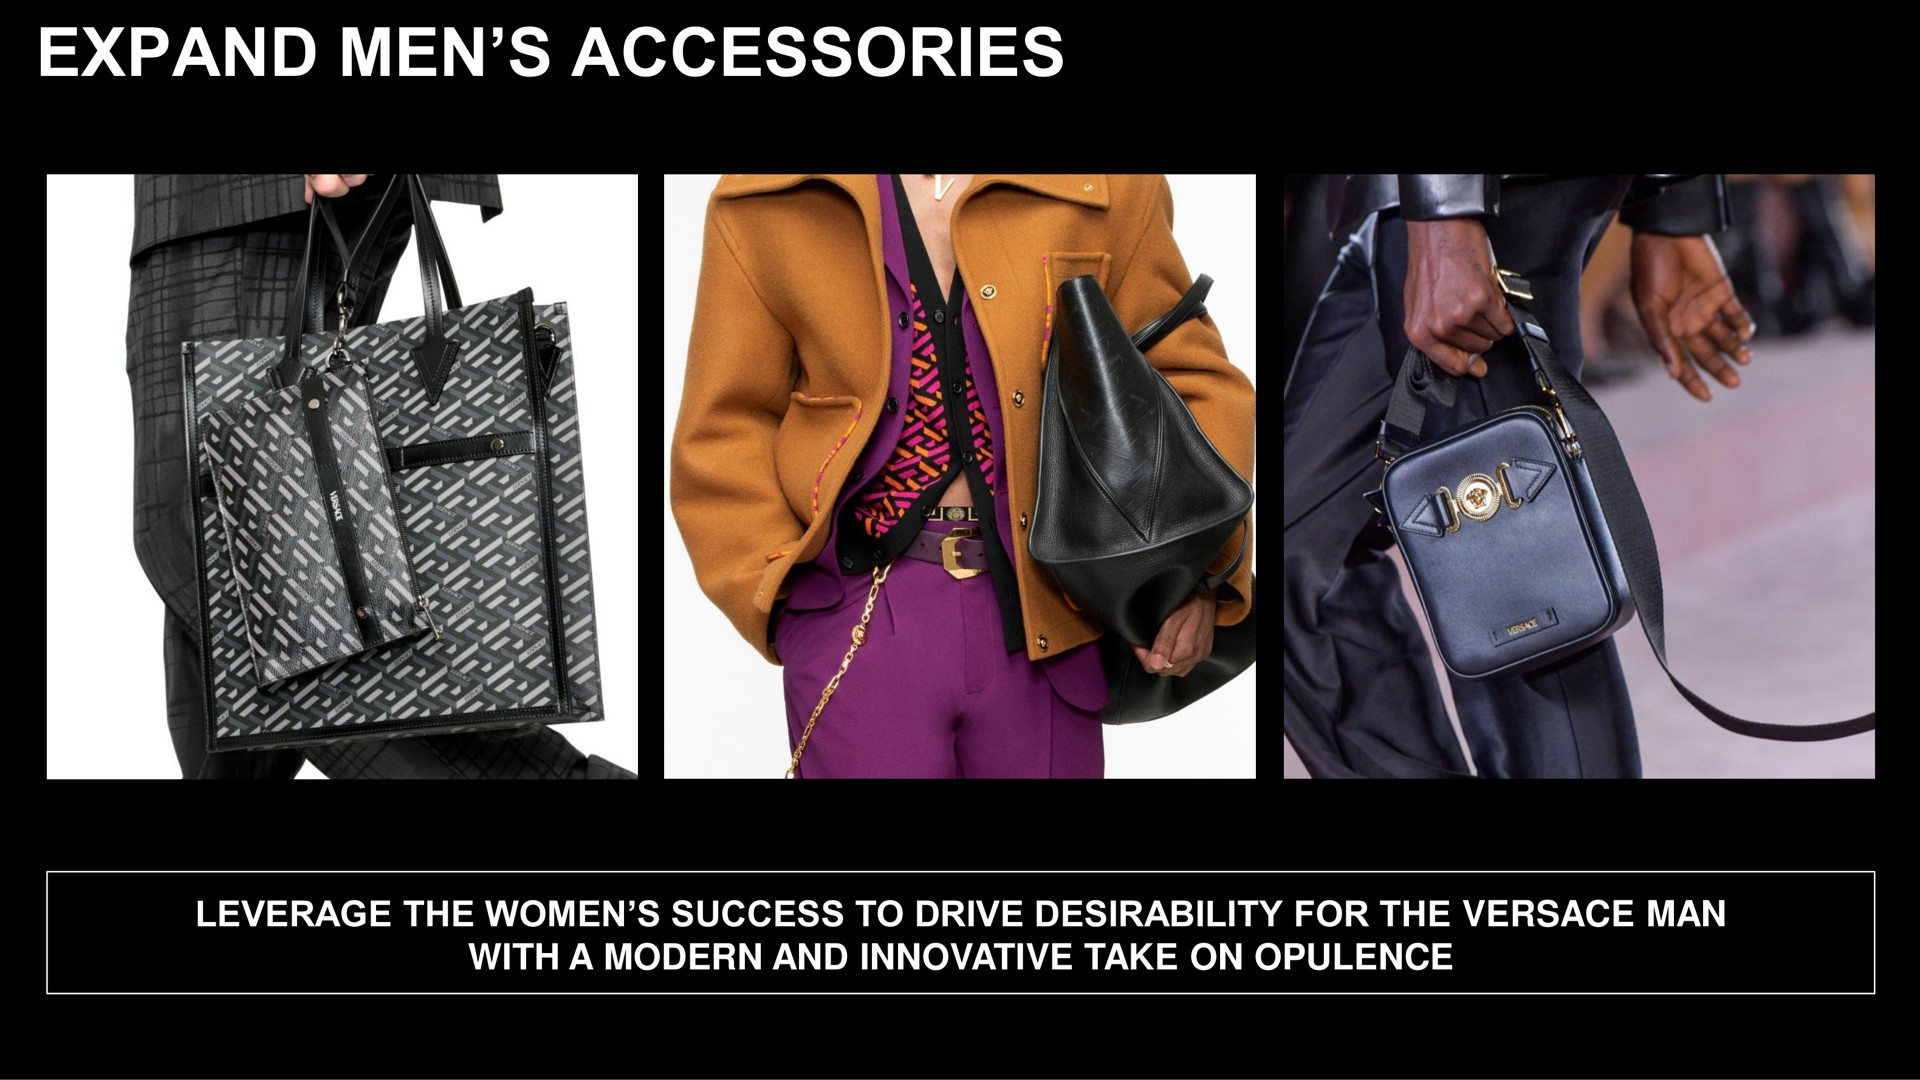 expand men accessories a leverage the women success to drive desirability for the man with a modern and innovative take on opulence | Capri Holdings